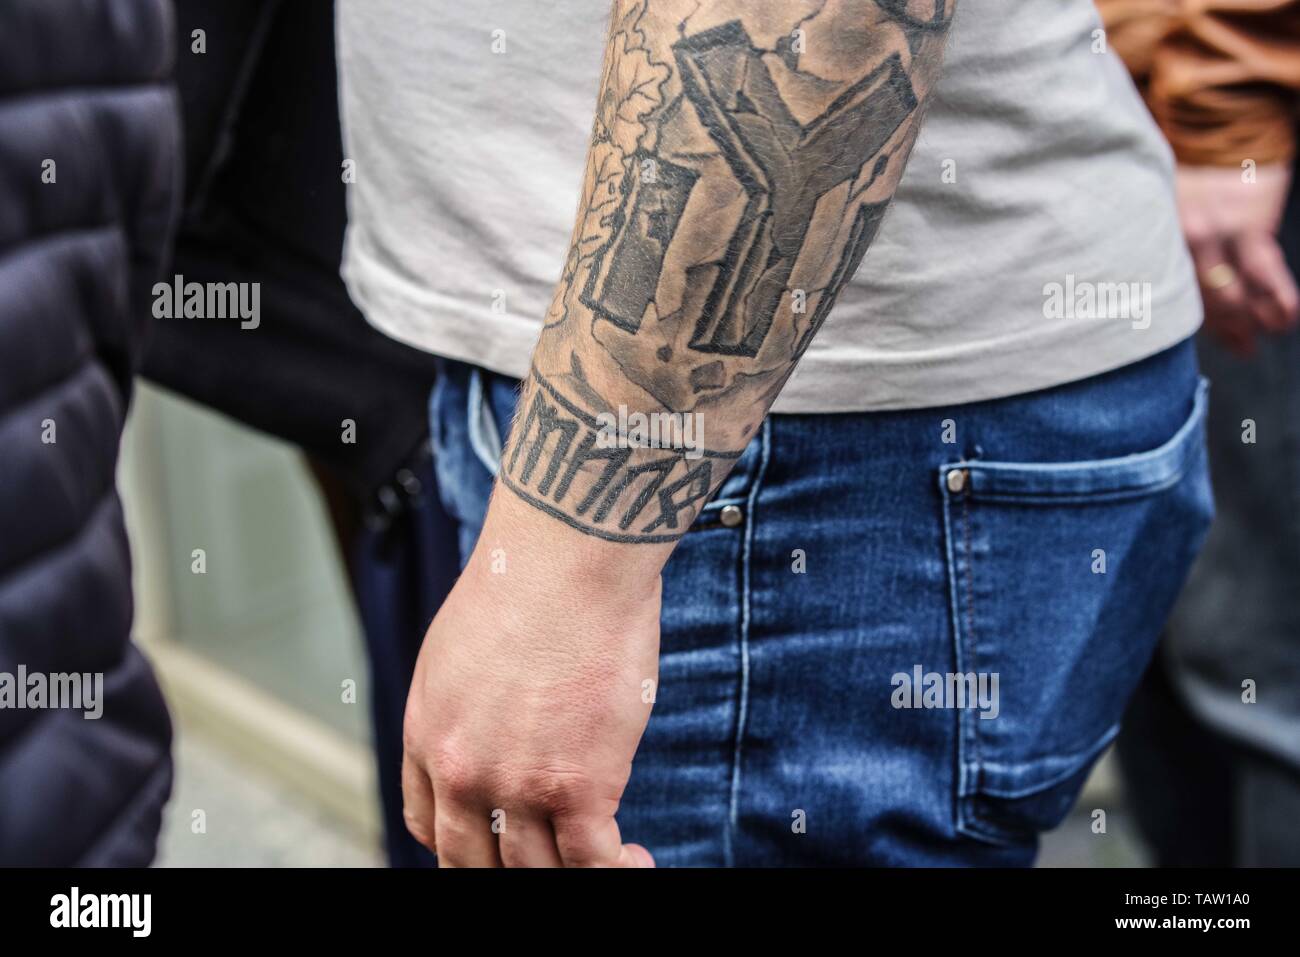 Dortmund, Nordrhein Westfalen, Germany. 25th May, 2019. Tattoos on a Bulgarian neonazi, including Runes. Prior to the European Elections, the neonazi party Die Rechte (The Right) organized a rally in the German city of Dortmund to promote their candidate, the incarcerated Holocaust denier Ursula Haverbeck. The demonstration and march were organized by prominent local political figure and neonazi activist Michael Brueck (Michael BrÃ¼ck) who enlisted the help of not only German neonazis, but also assistance from Russian, Bulgarian, Hungarian, and Dutch groups with the final tally ranging from 1 Stock Photo